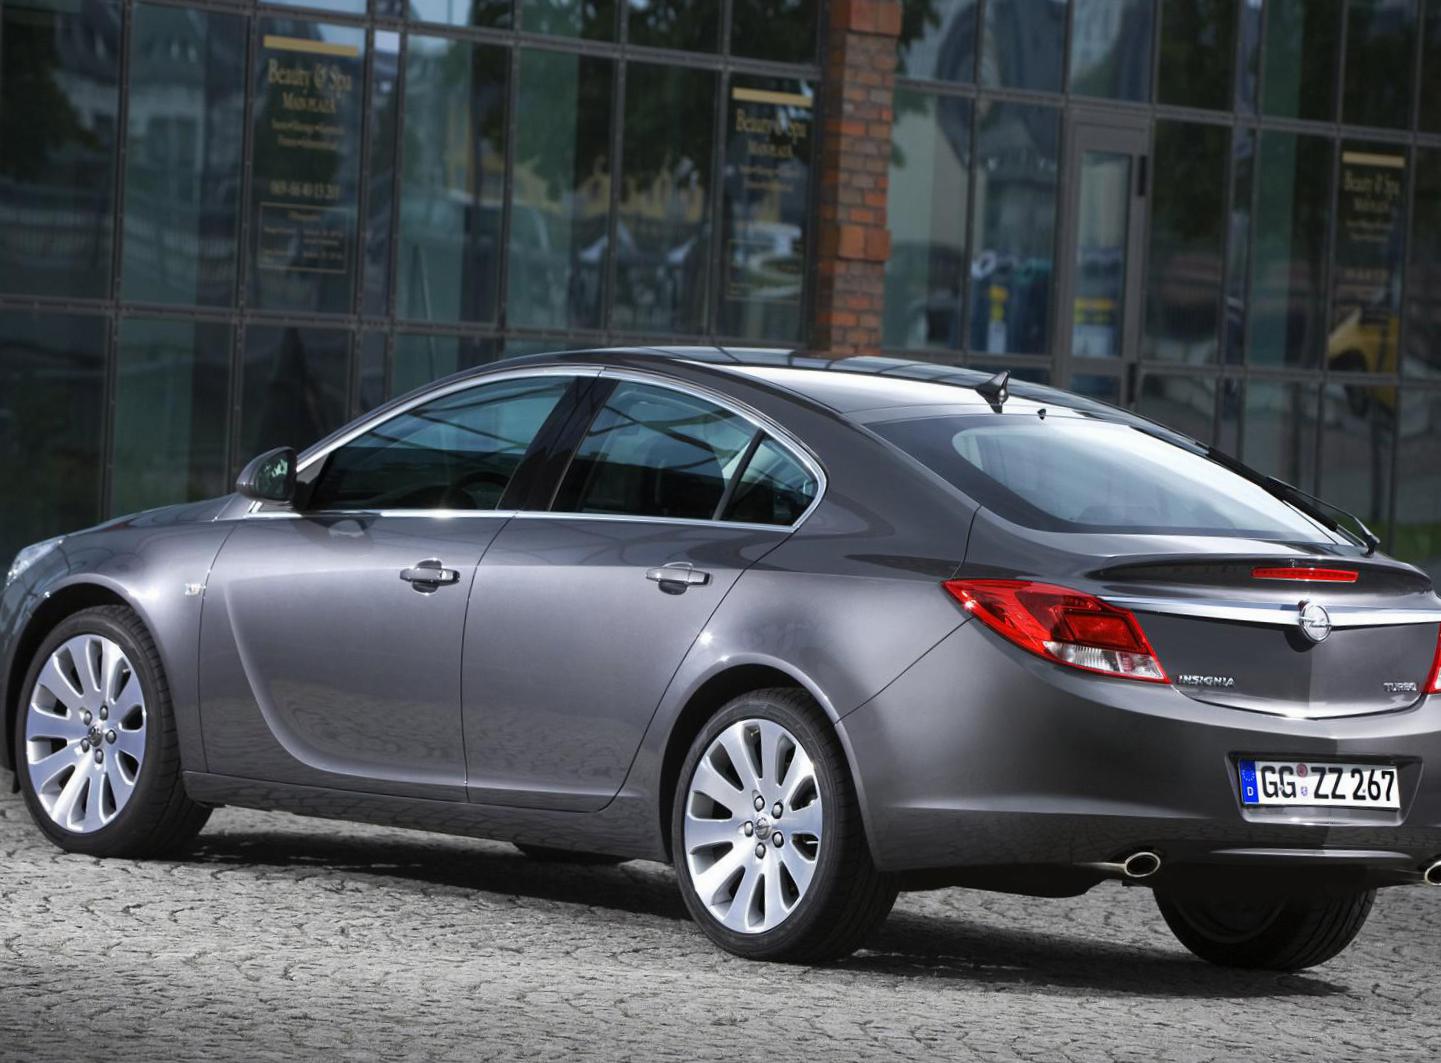 Insignia OPC Hatchback Opel parts wagon